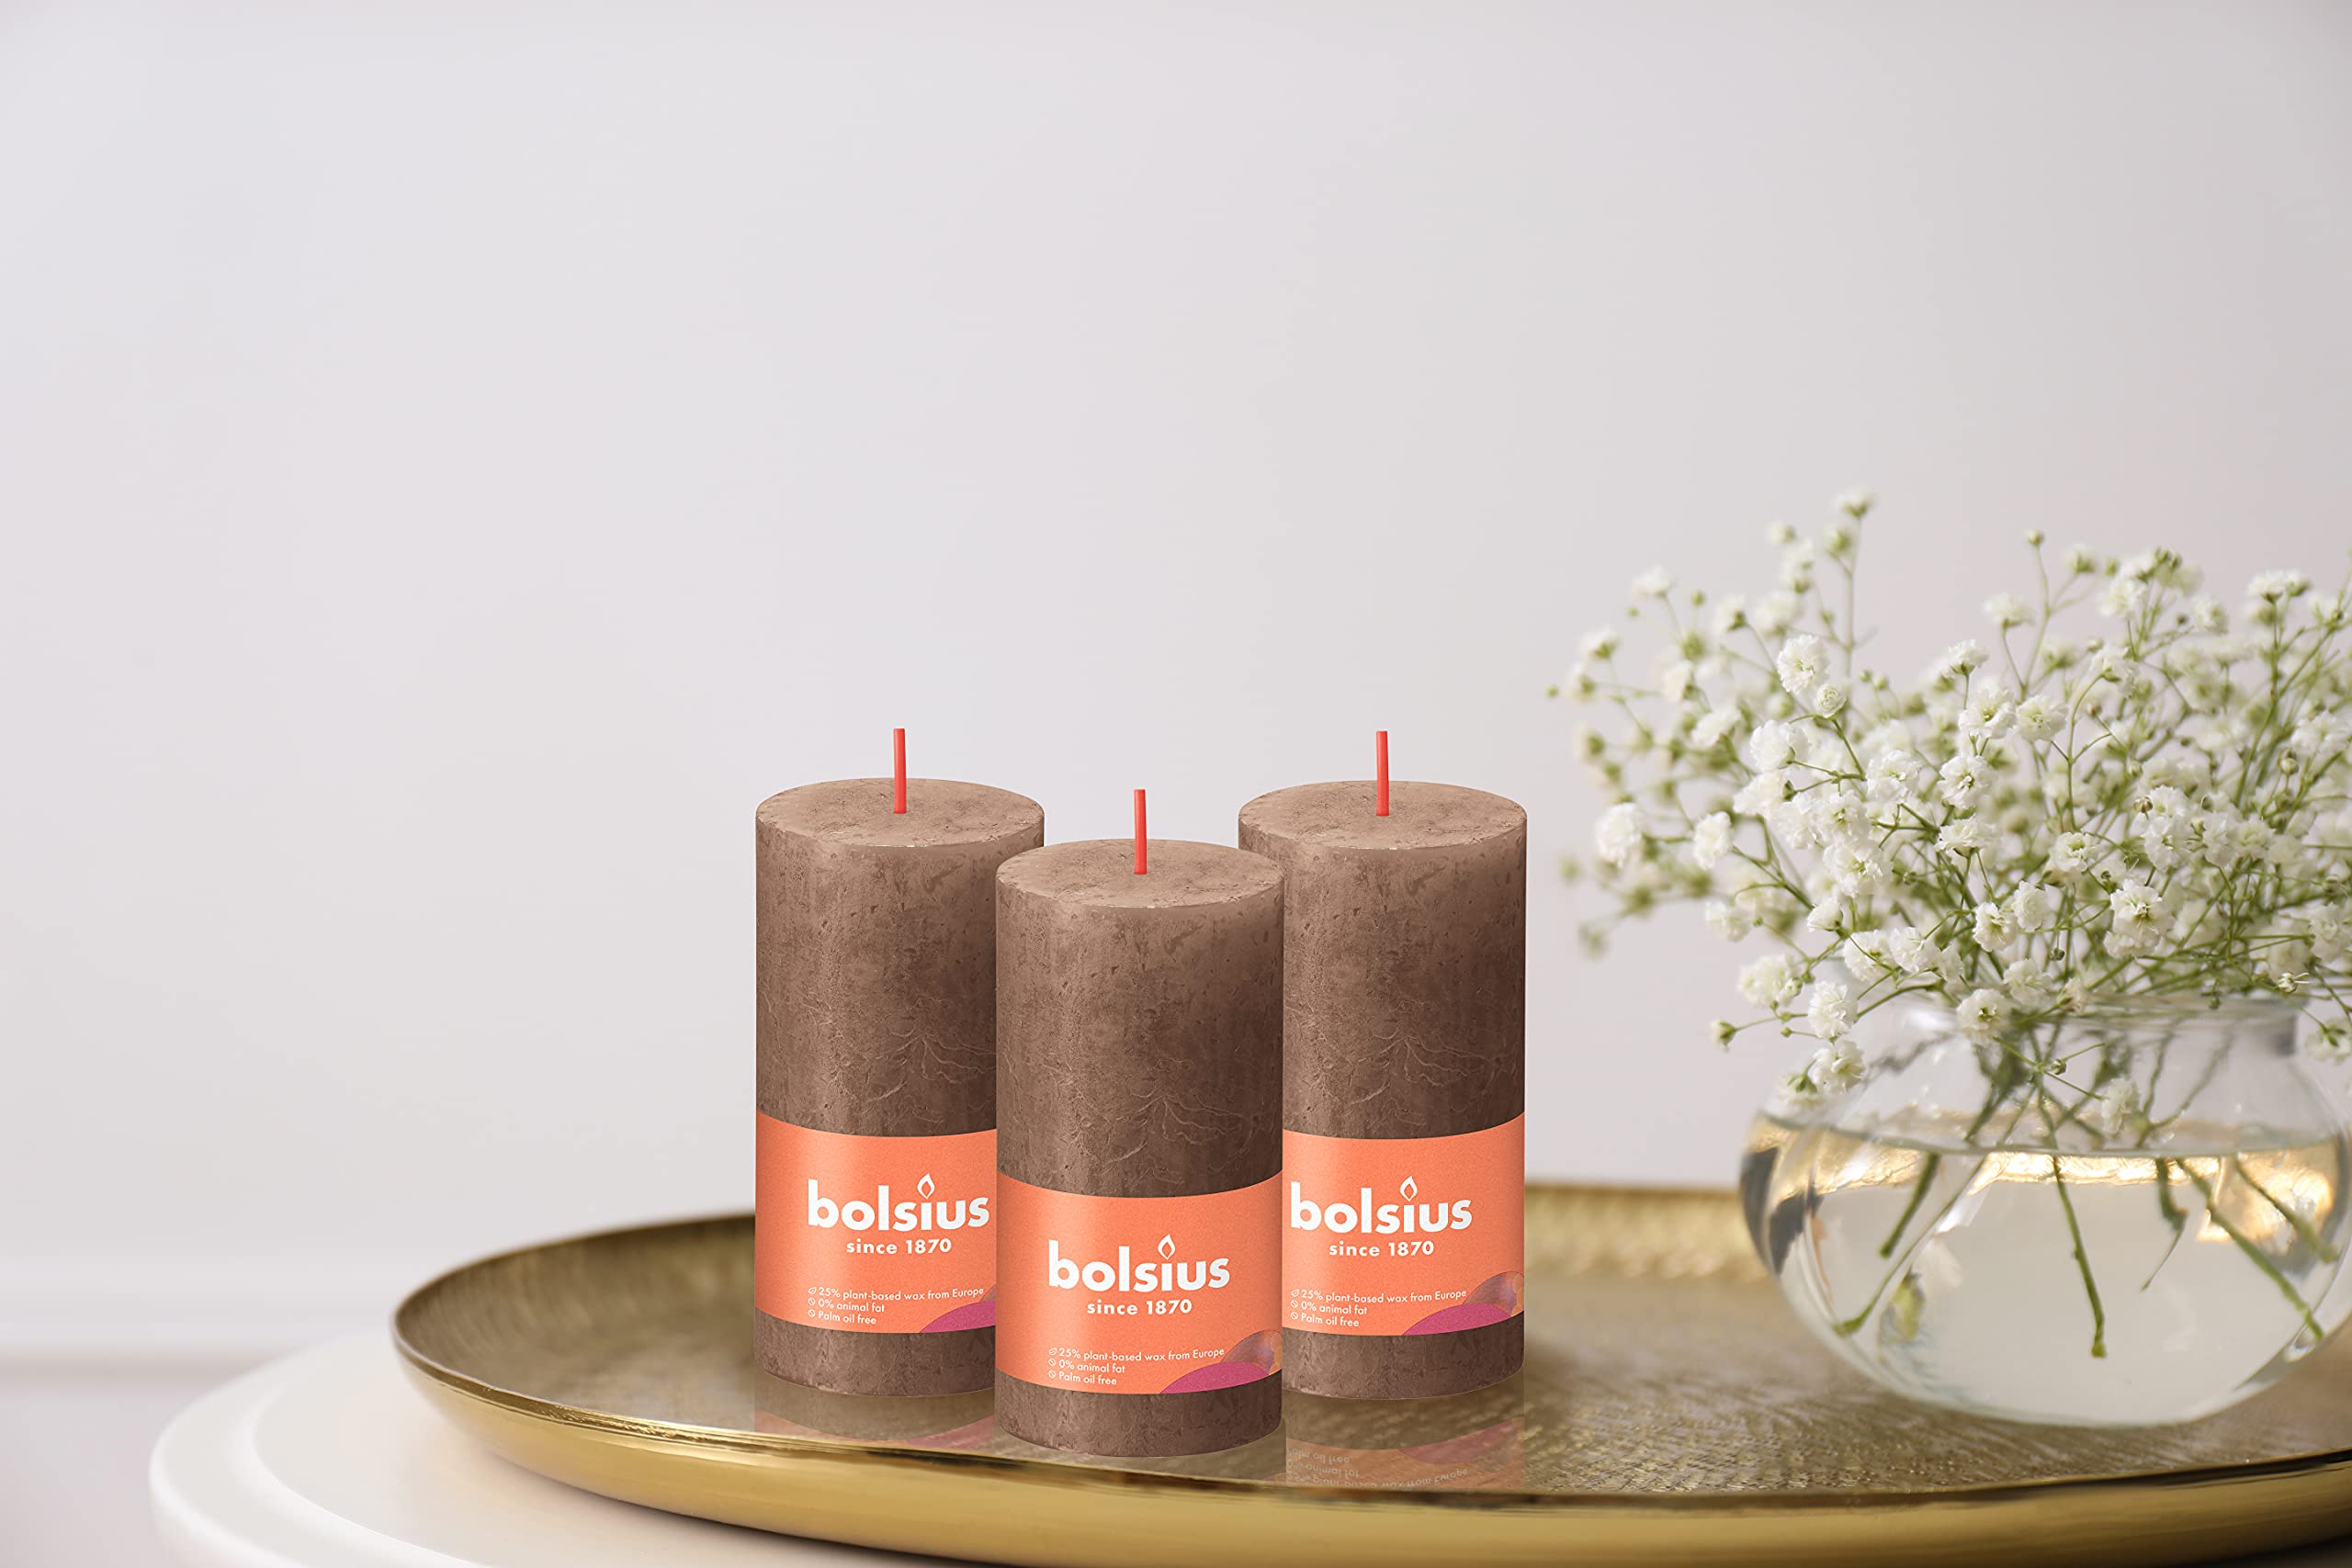 BOLSIUS 4 Pack Suede Brown Rustic Pillar Candles - 2 X 4 Inches - Premium European Quality - Includes Natural Plant-Based Wax - Unscented Dripless Smokeless 30 Hour Party D�cor and Wedding Candles  - Like New